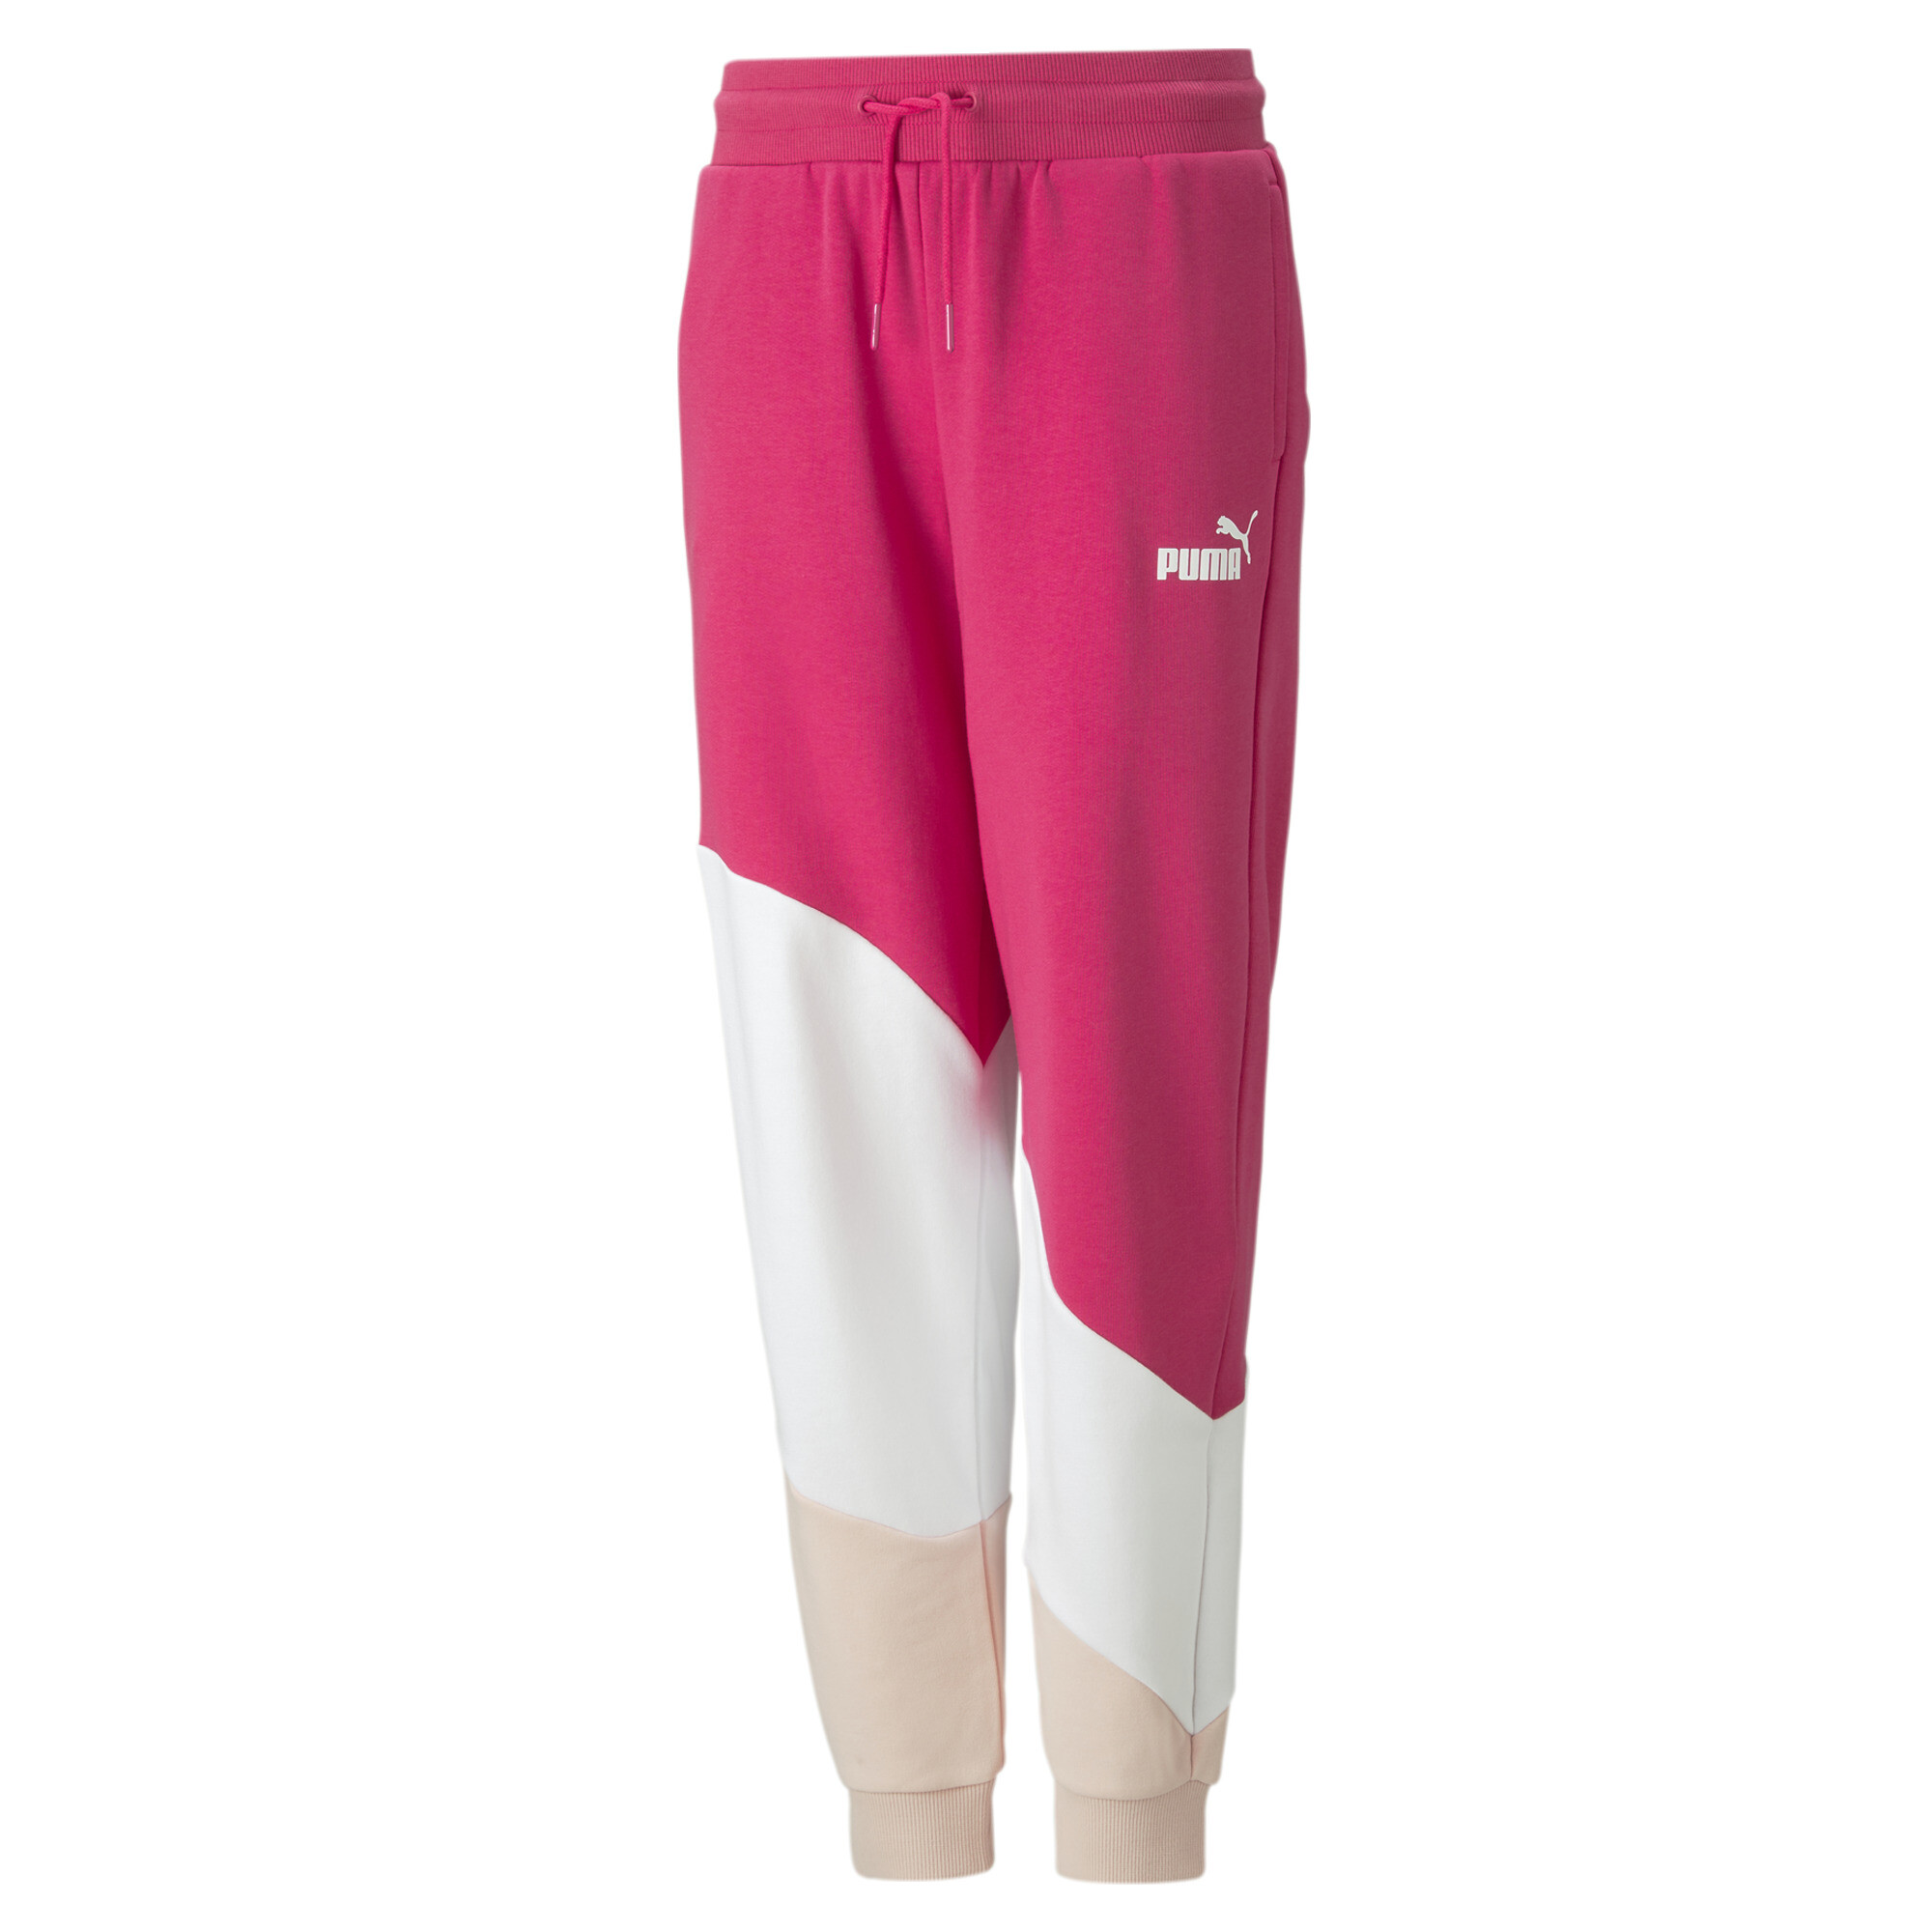 PUMA POWER Cat Pants In Pink, Size 3-4 Youth